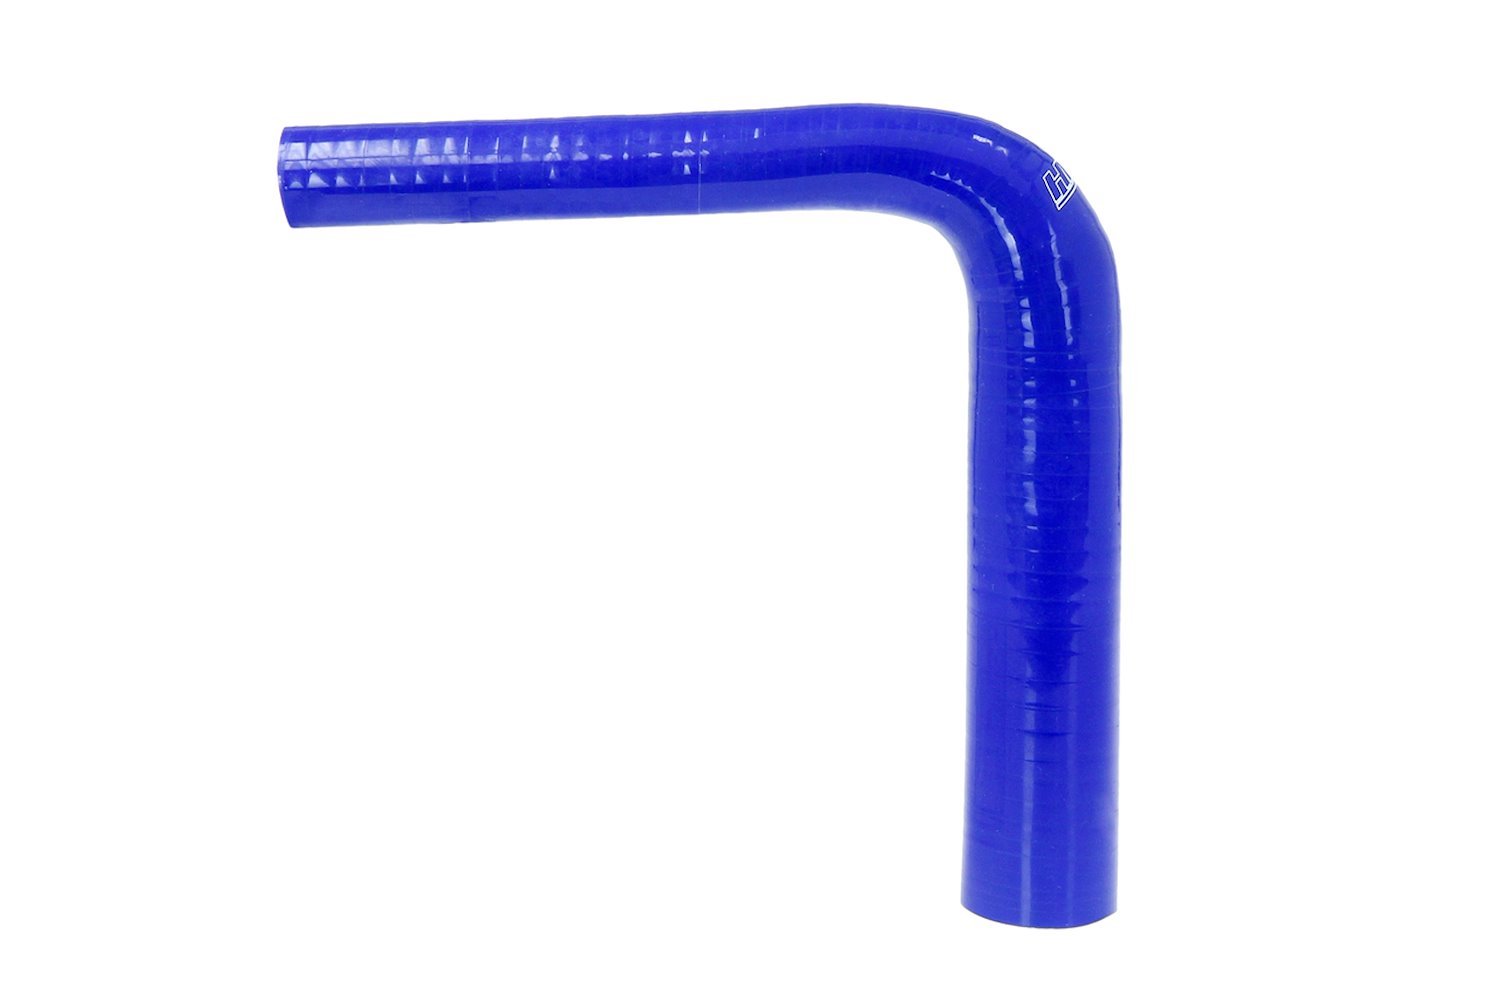 HTSER90-050-075-BLUE Silicone 90-Degree Elbow Hose, High-Temp 4-Ply Reinforced, 1/2 in. - 3/4 in. ID, Blue